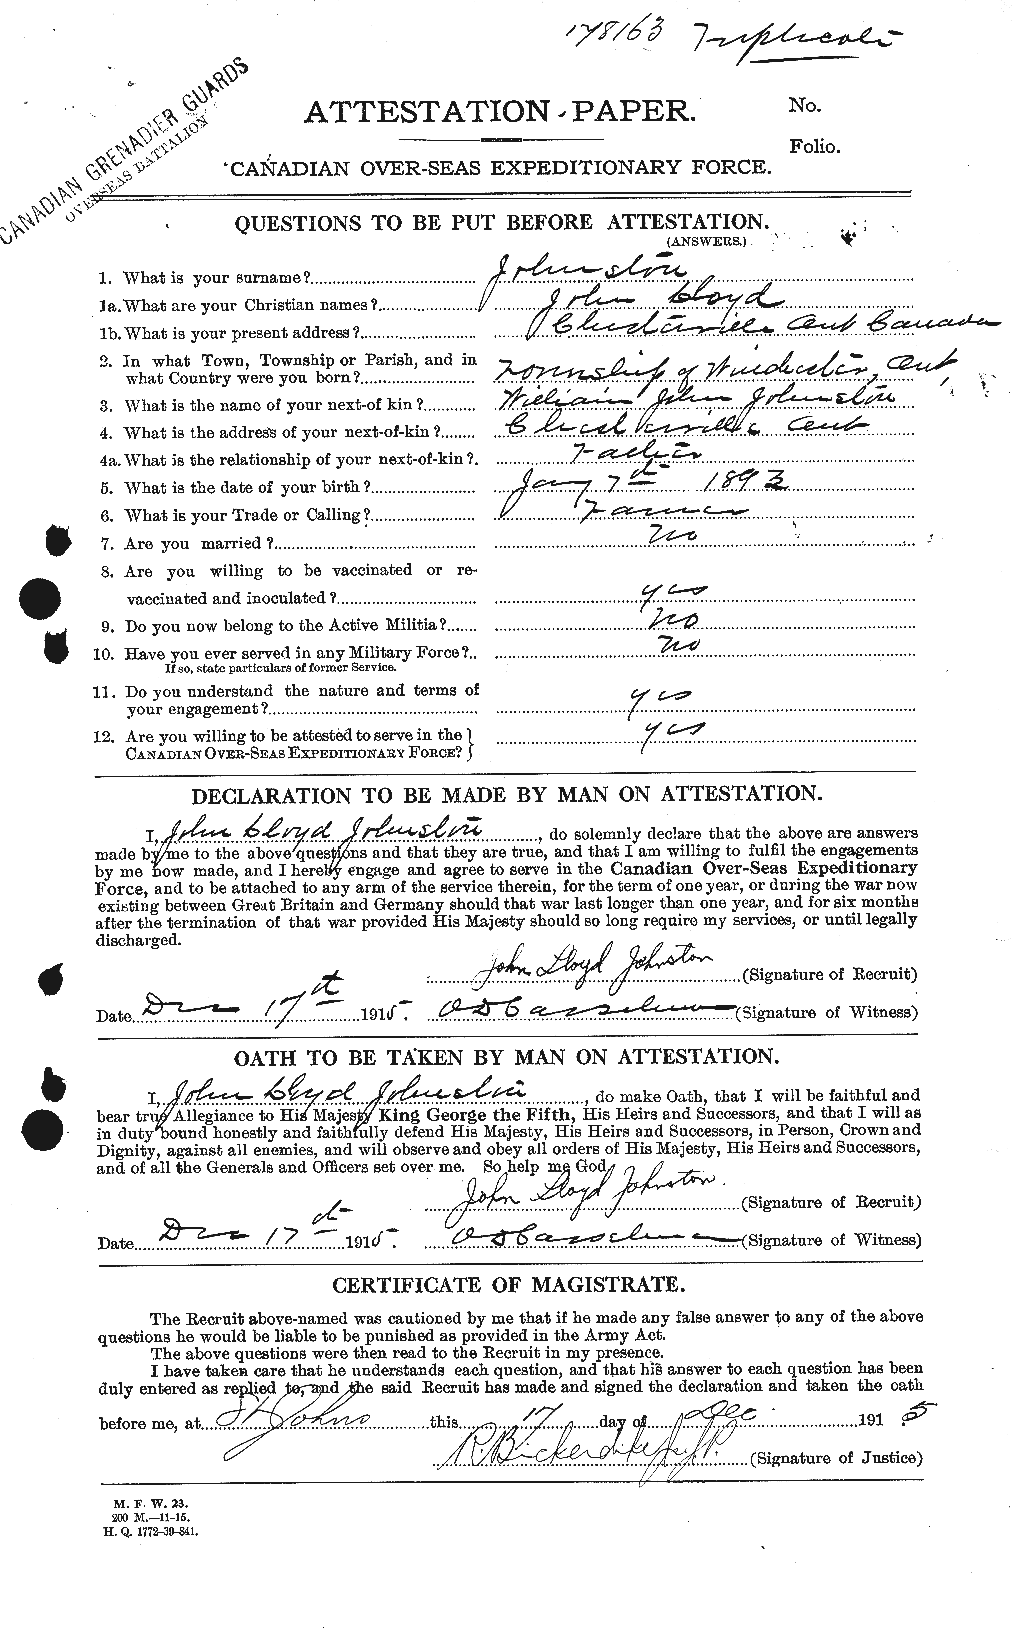 Personnel Records of the First World War - CEF 422850a